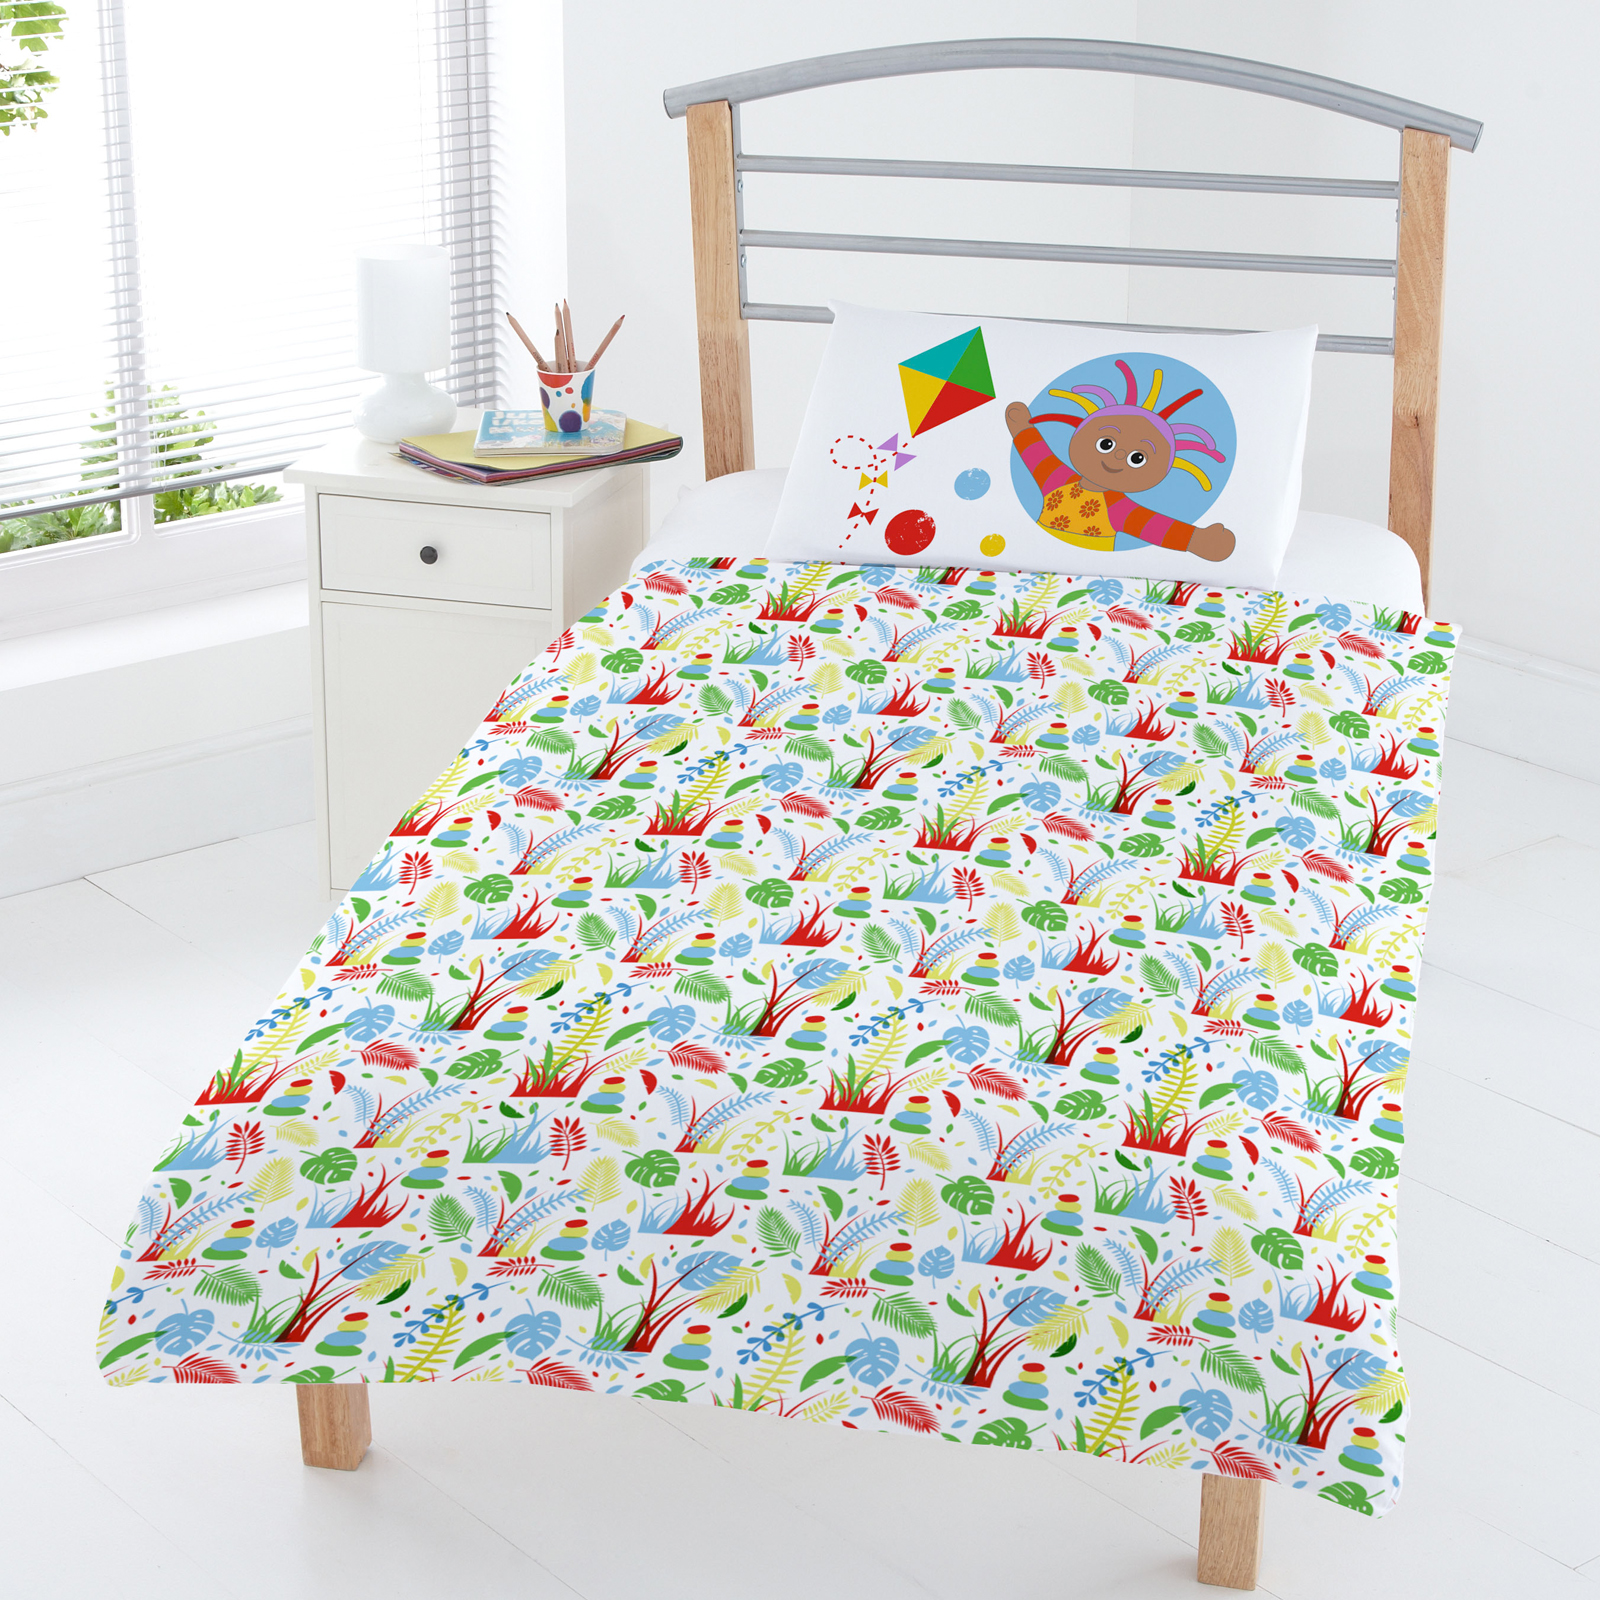 Upsy Daisy Bedding Set *Limited Edition* Igglepiggle In the Night Garden